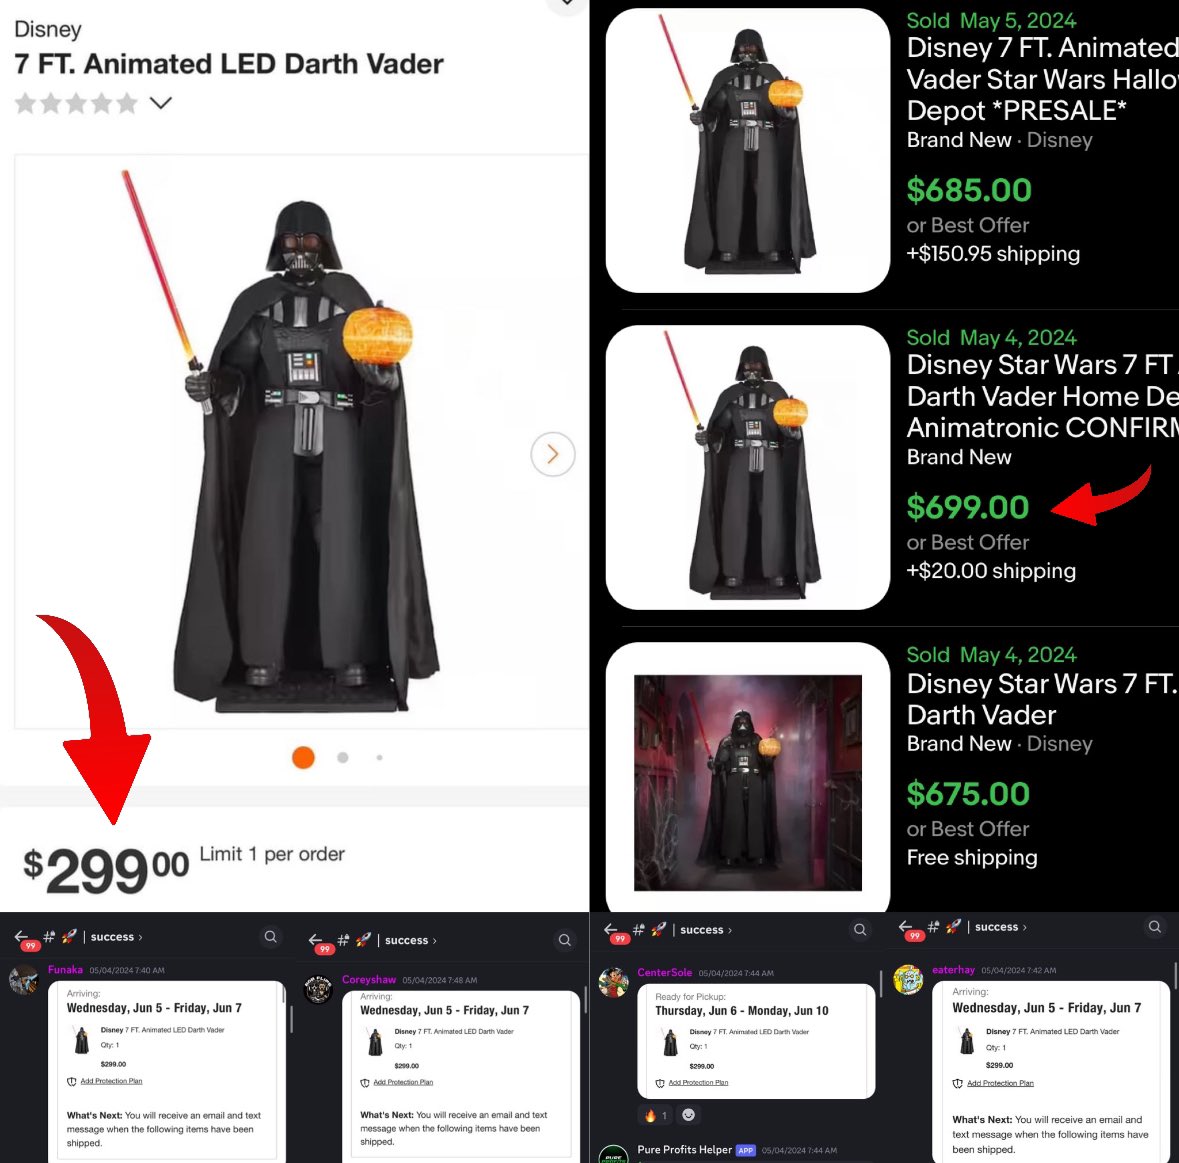 Another fantastic flip went down this weekend and you could’ve made over $1,000 in profit from it 🤝 - Star Wars released a life sized Darth Vader figure, now if you know anything about life sized Star Wars figures, you know they go for bread so $300 is a great buy in price -